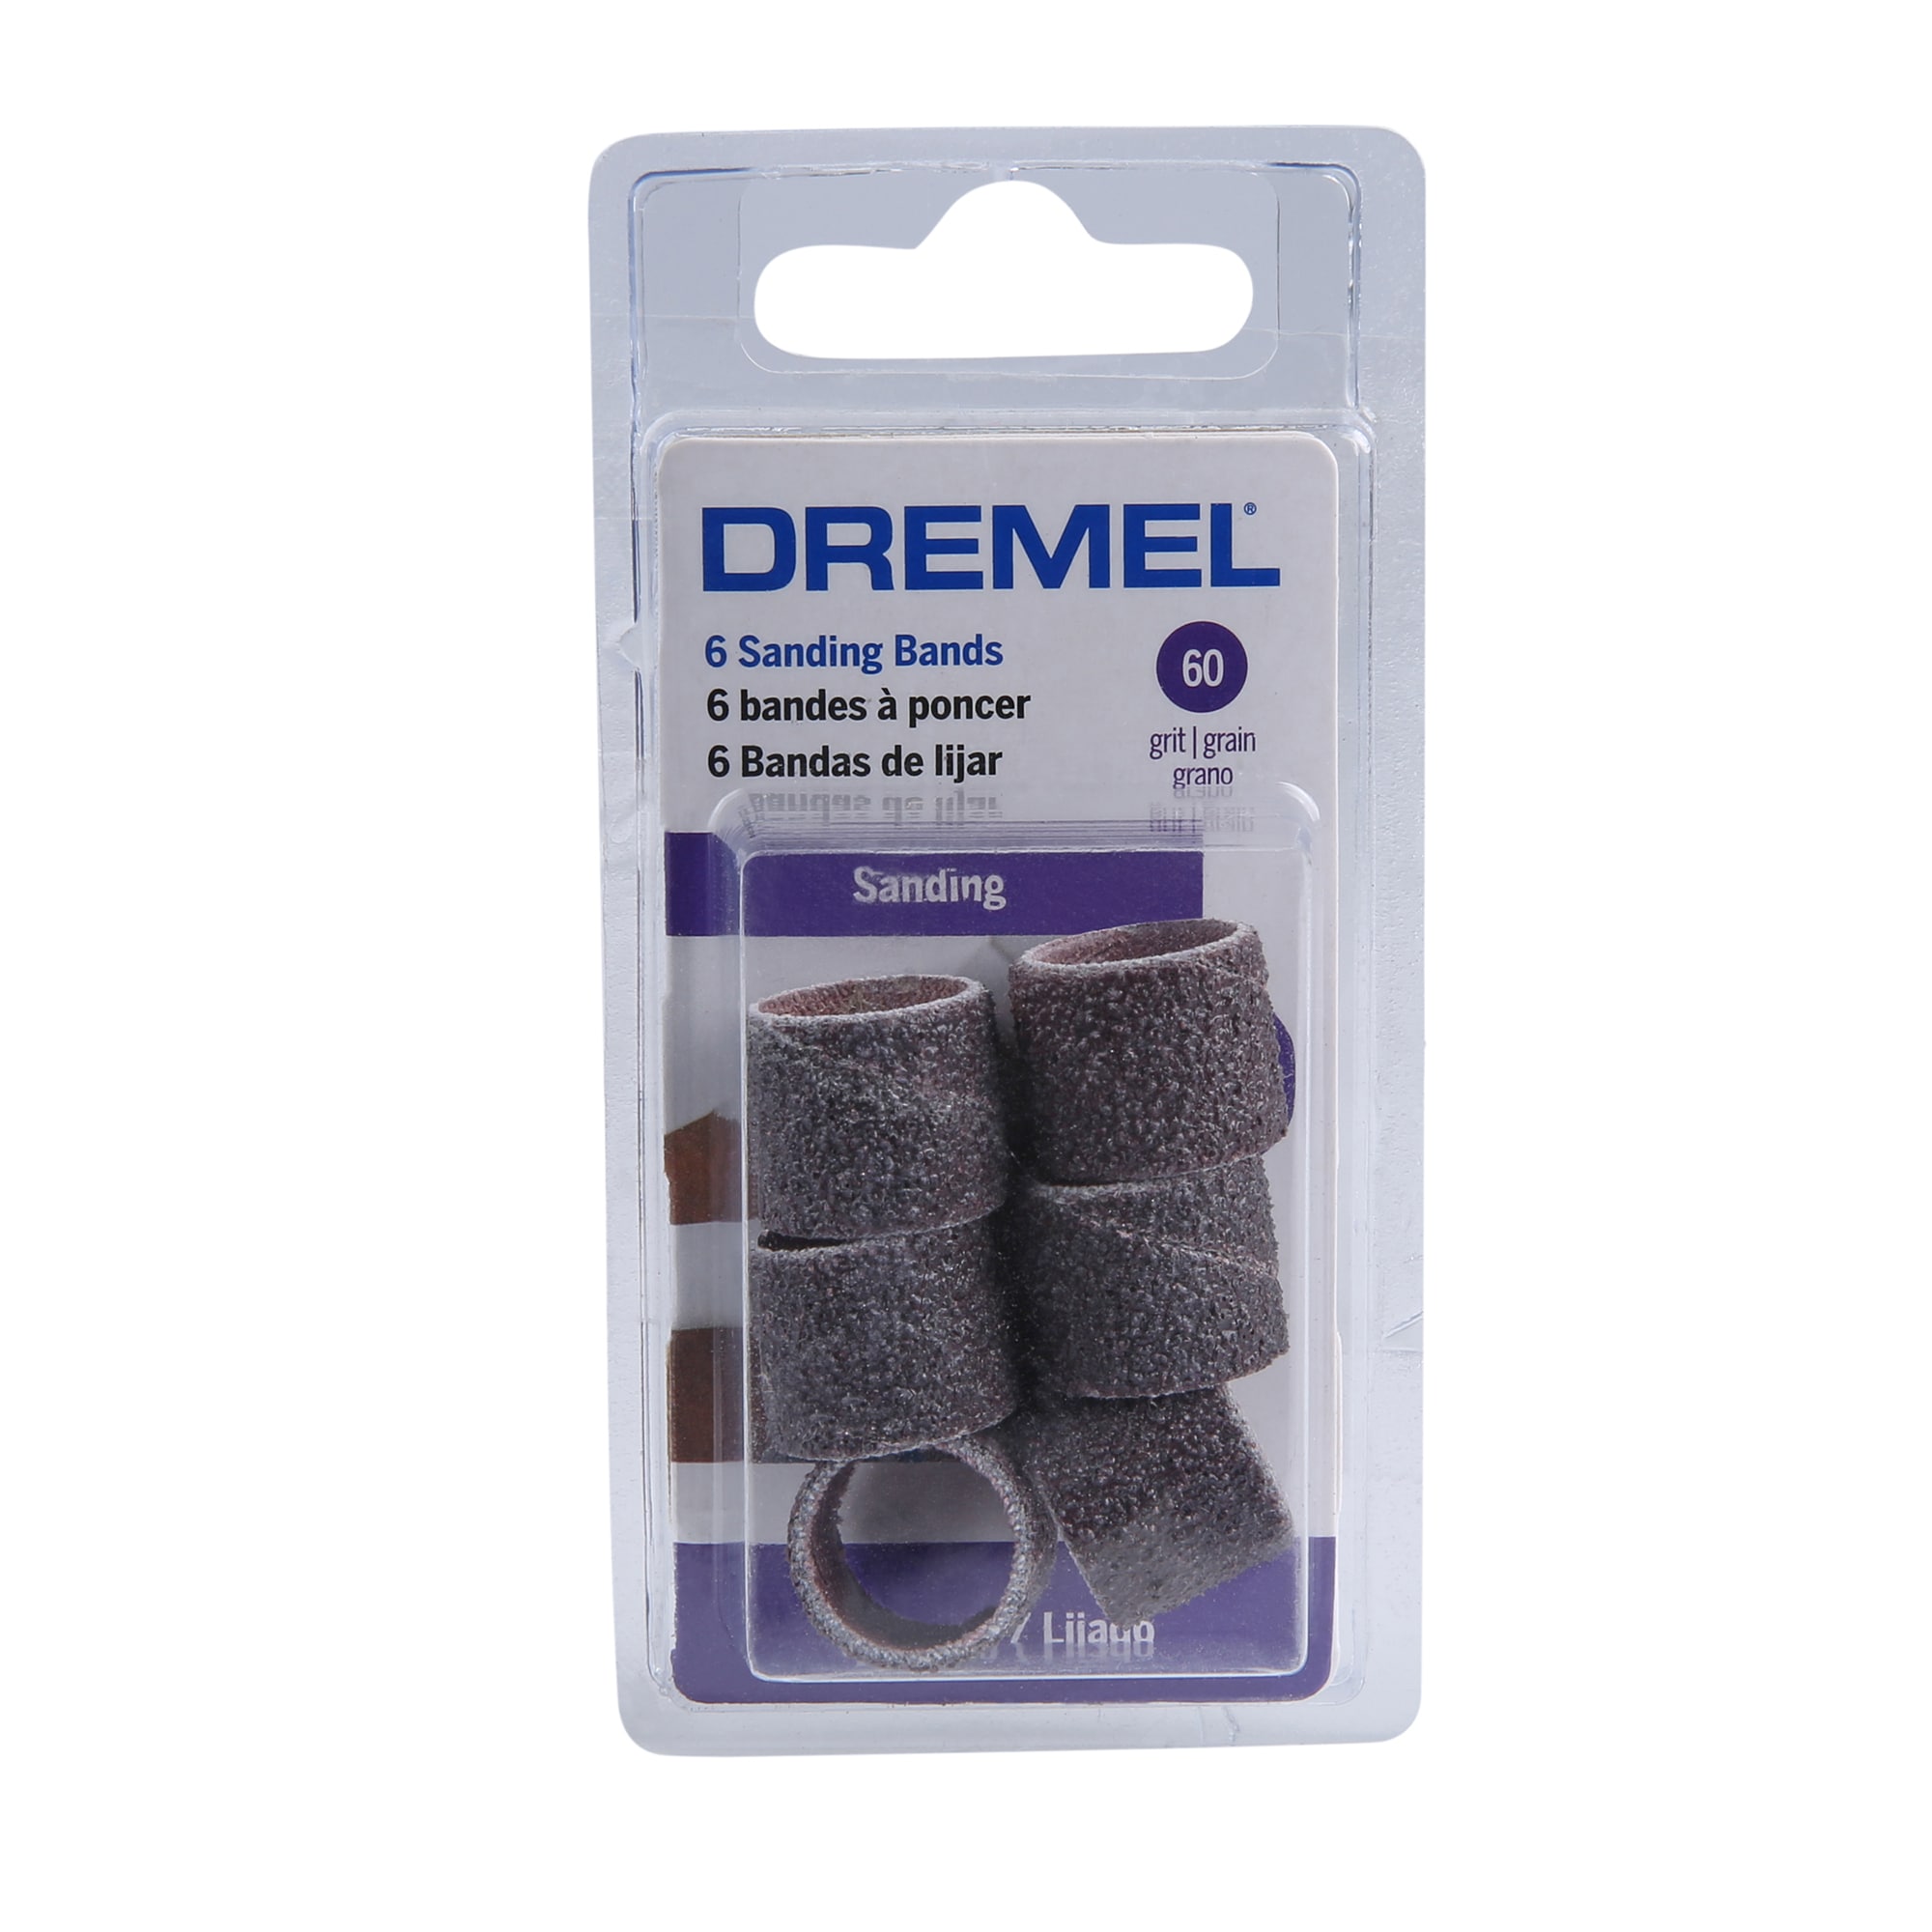 Dremel 408 – 1/2 Inch 60 Grit Rotary Tool Sanding Bands, 6 Pack